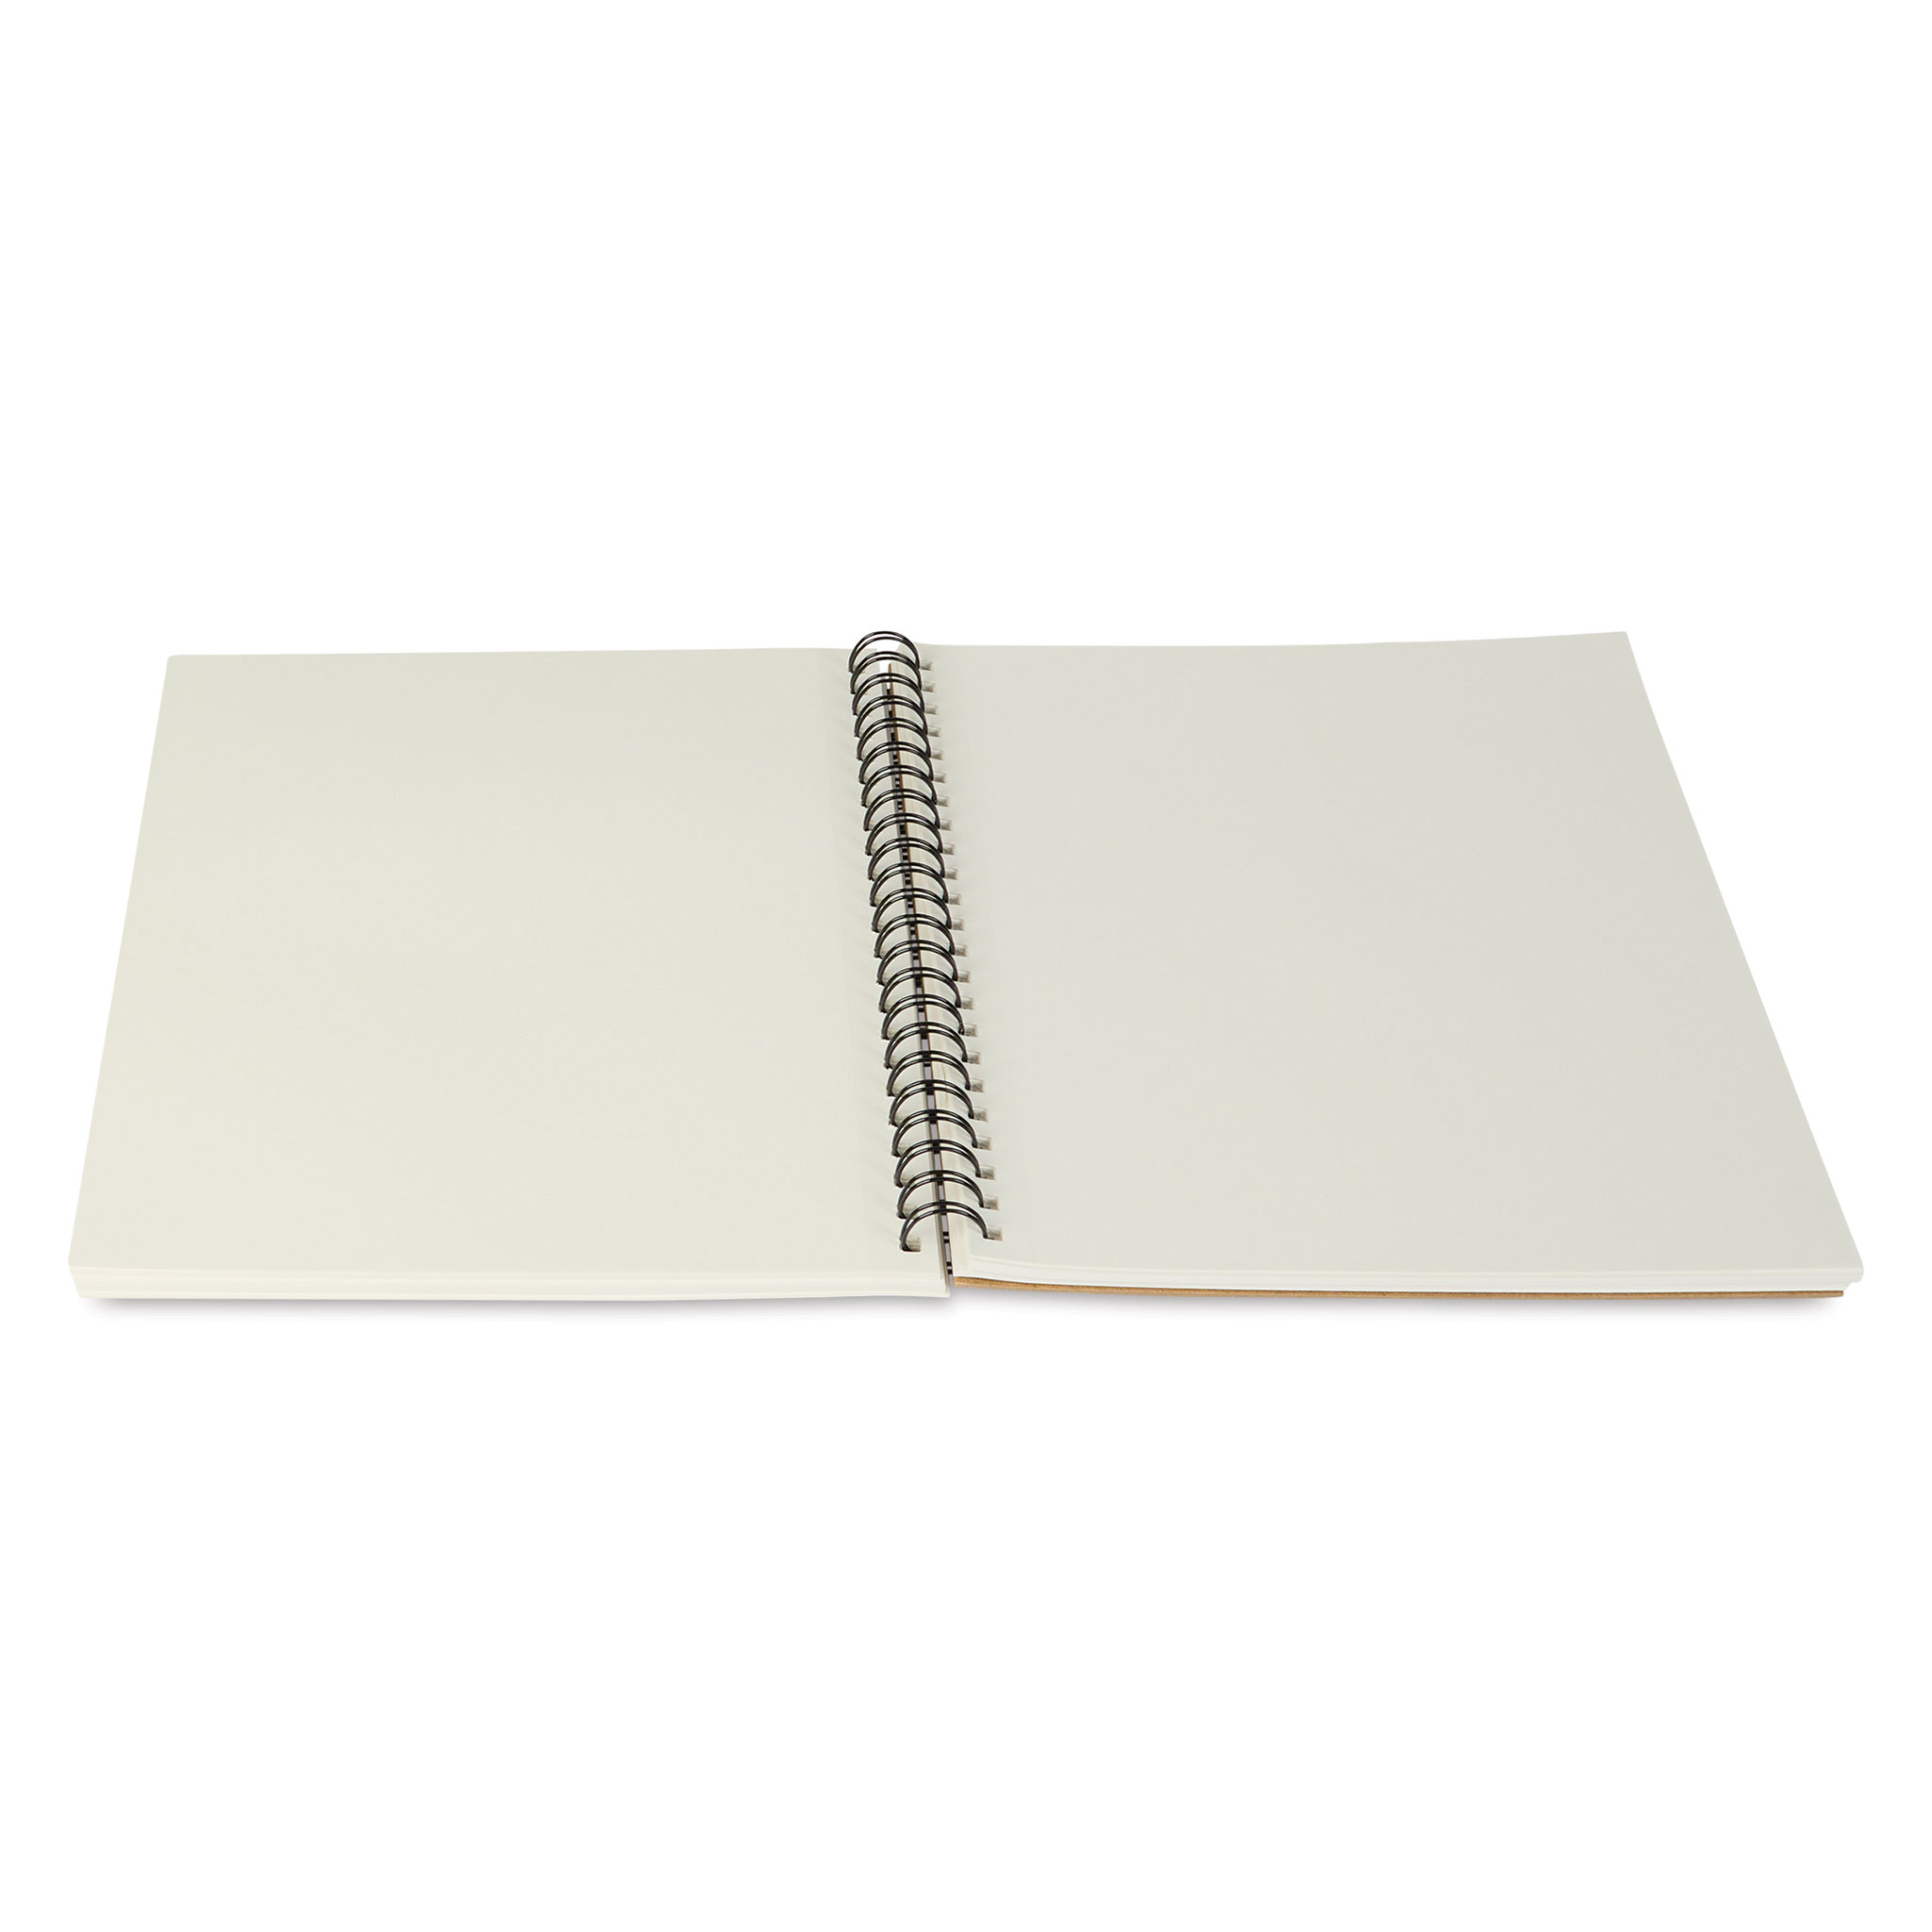 Canson Universal Spiral Sketch Book 9X12 - 100 Sheets - 7071947